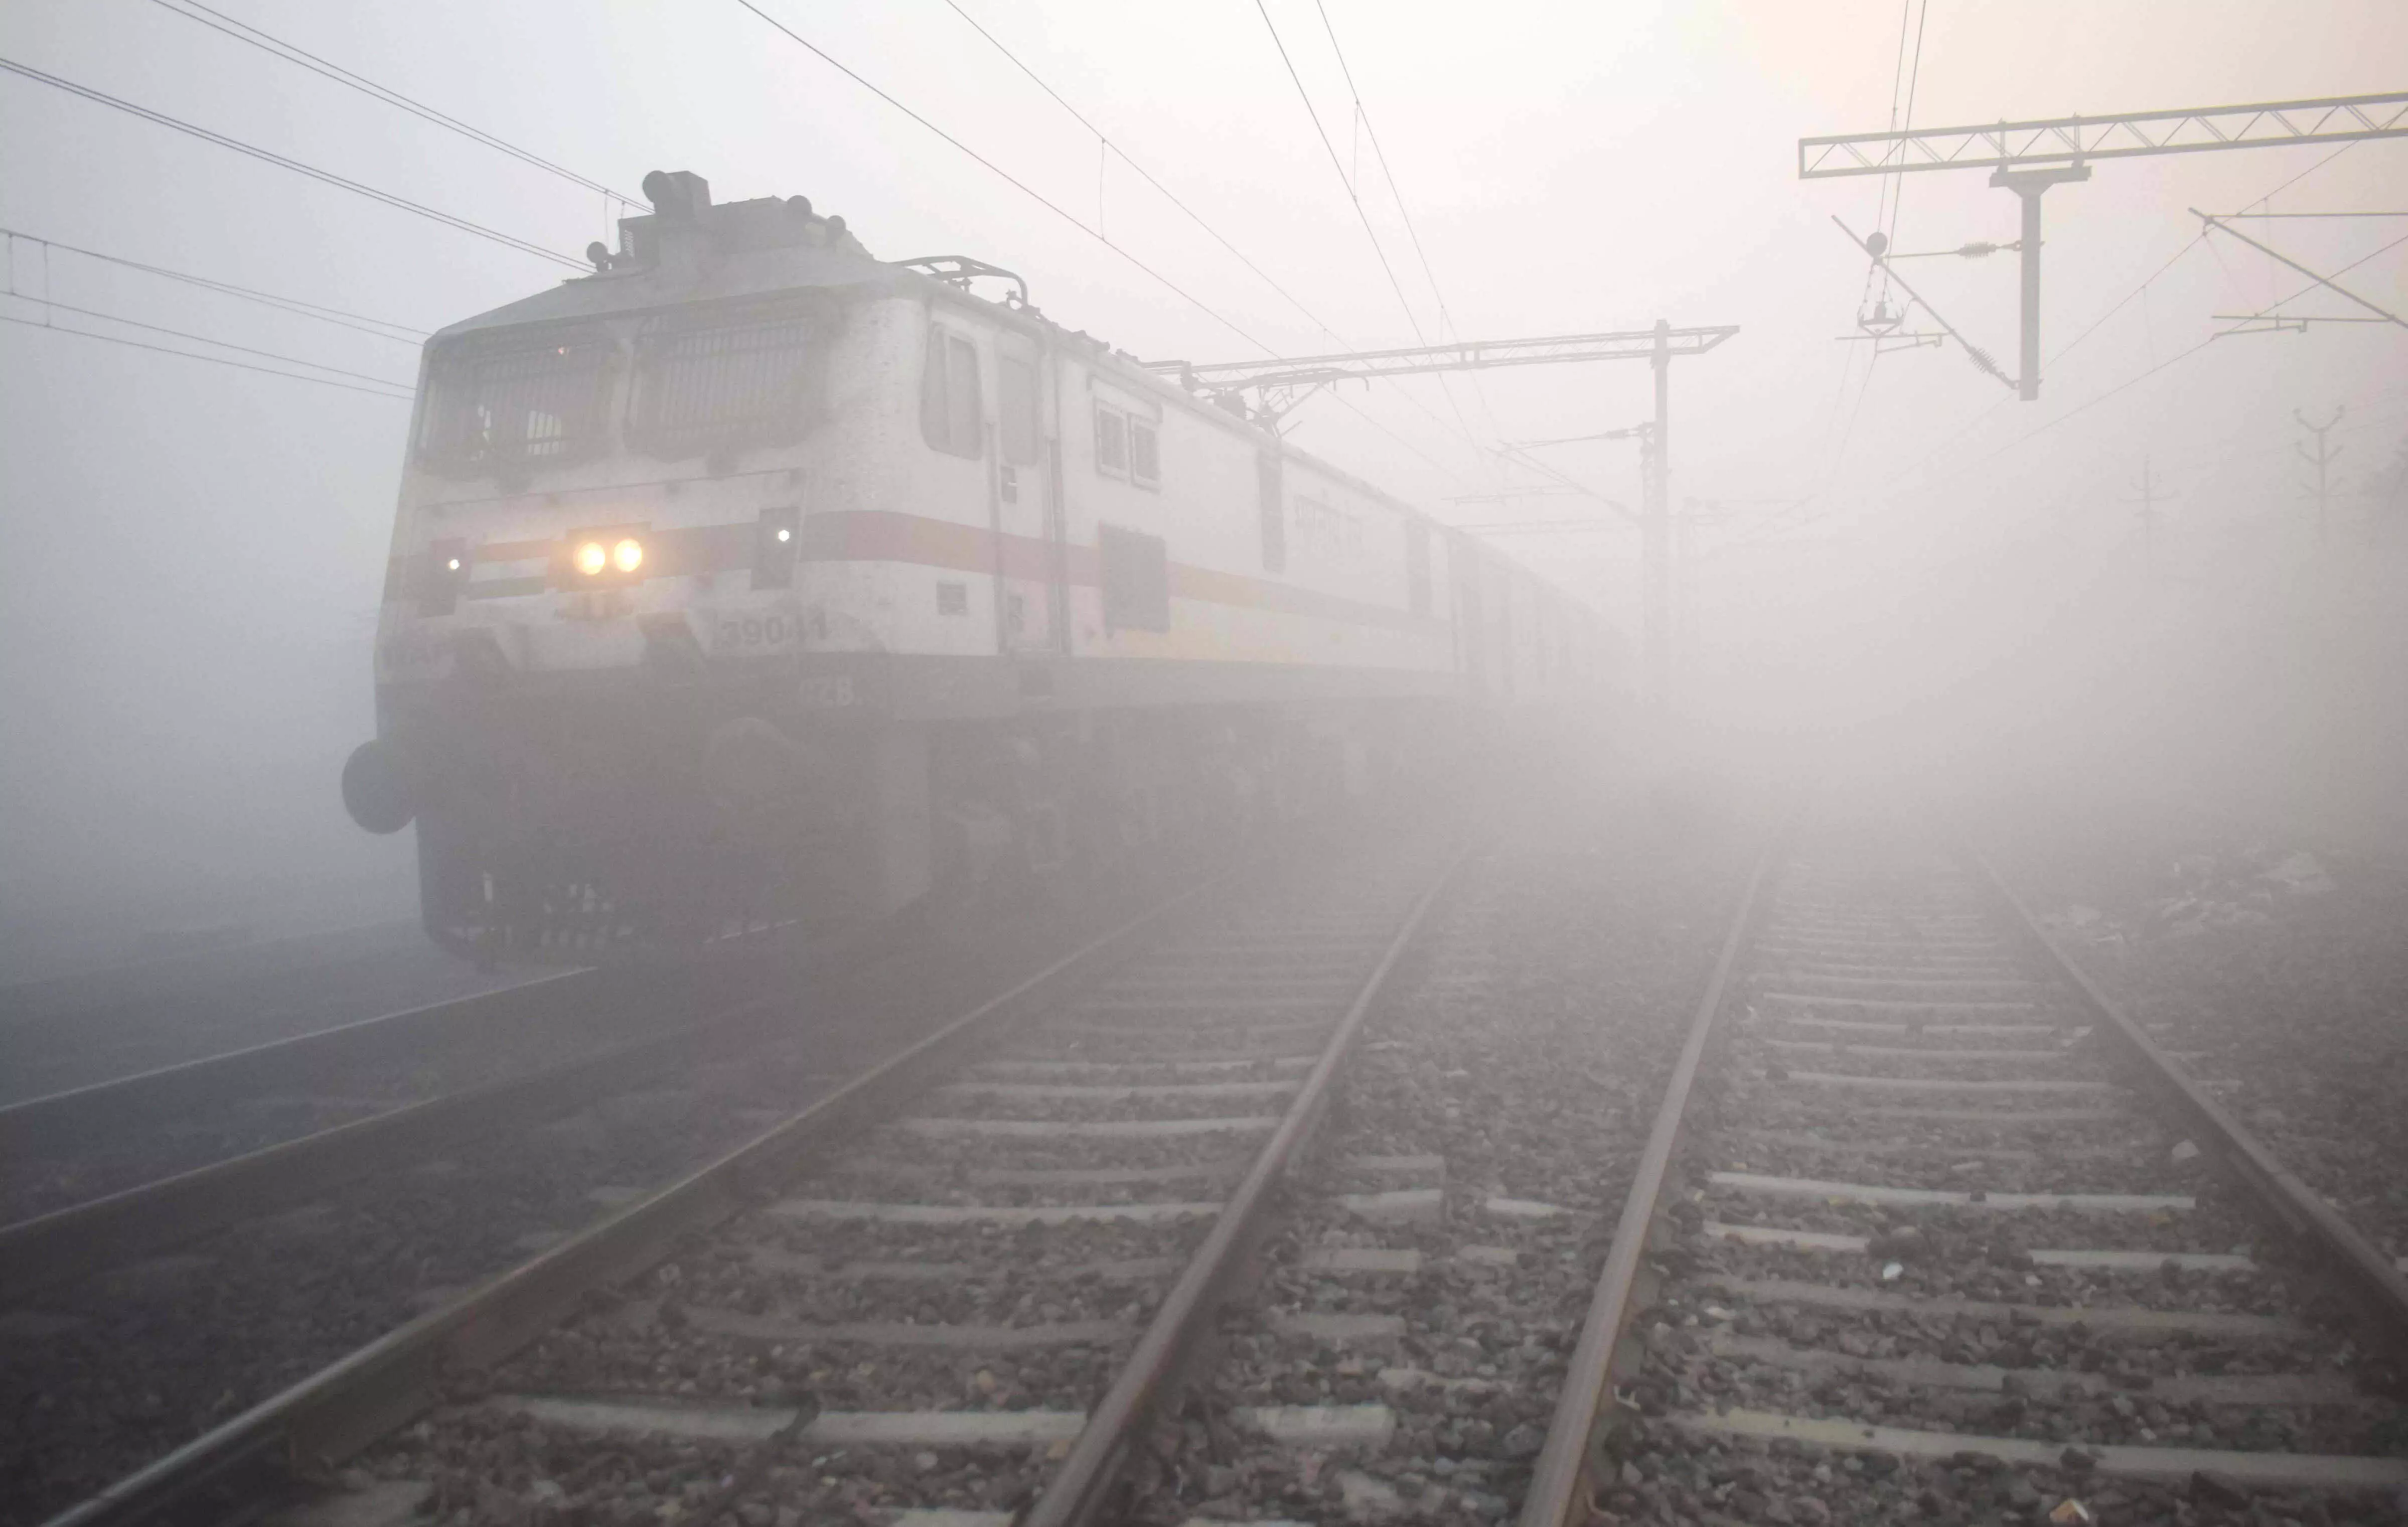 335 trains delayed, 88 cancelled, 31 diverted and 33 short terminated due to foggy weather: Railways